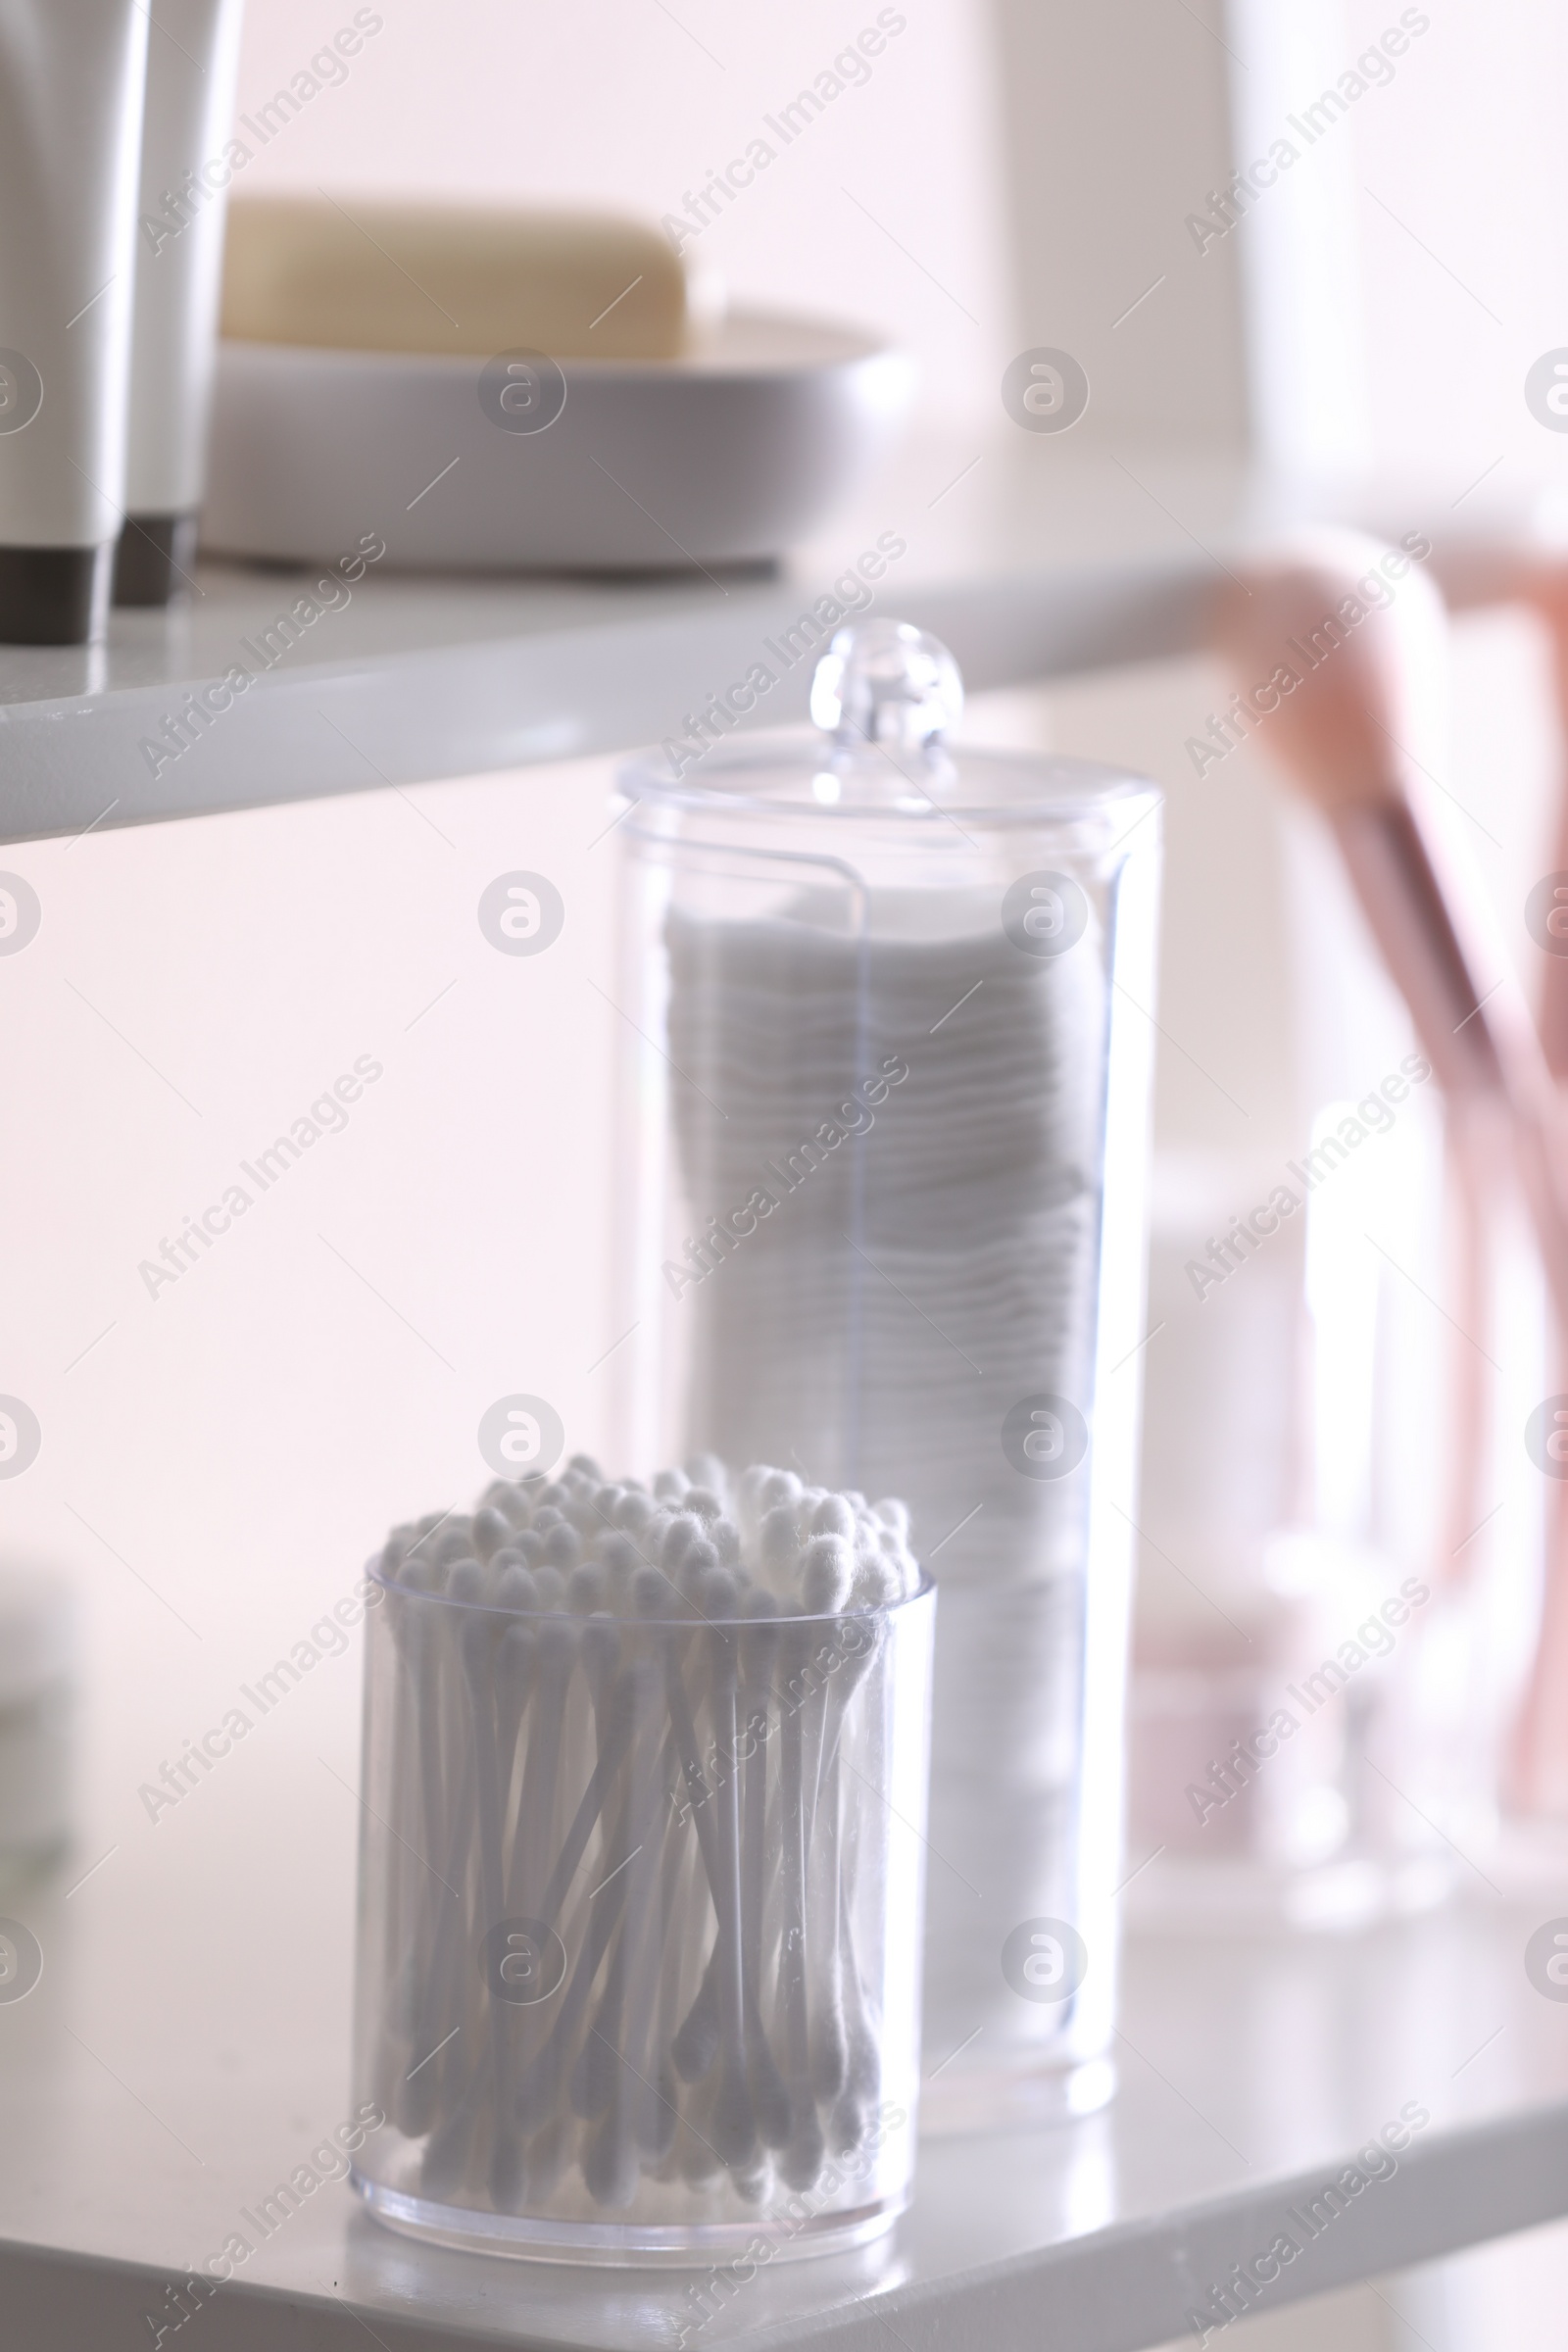 Photo of Cotton buds and pads in transparent holders on shelf